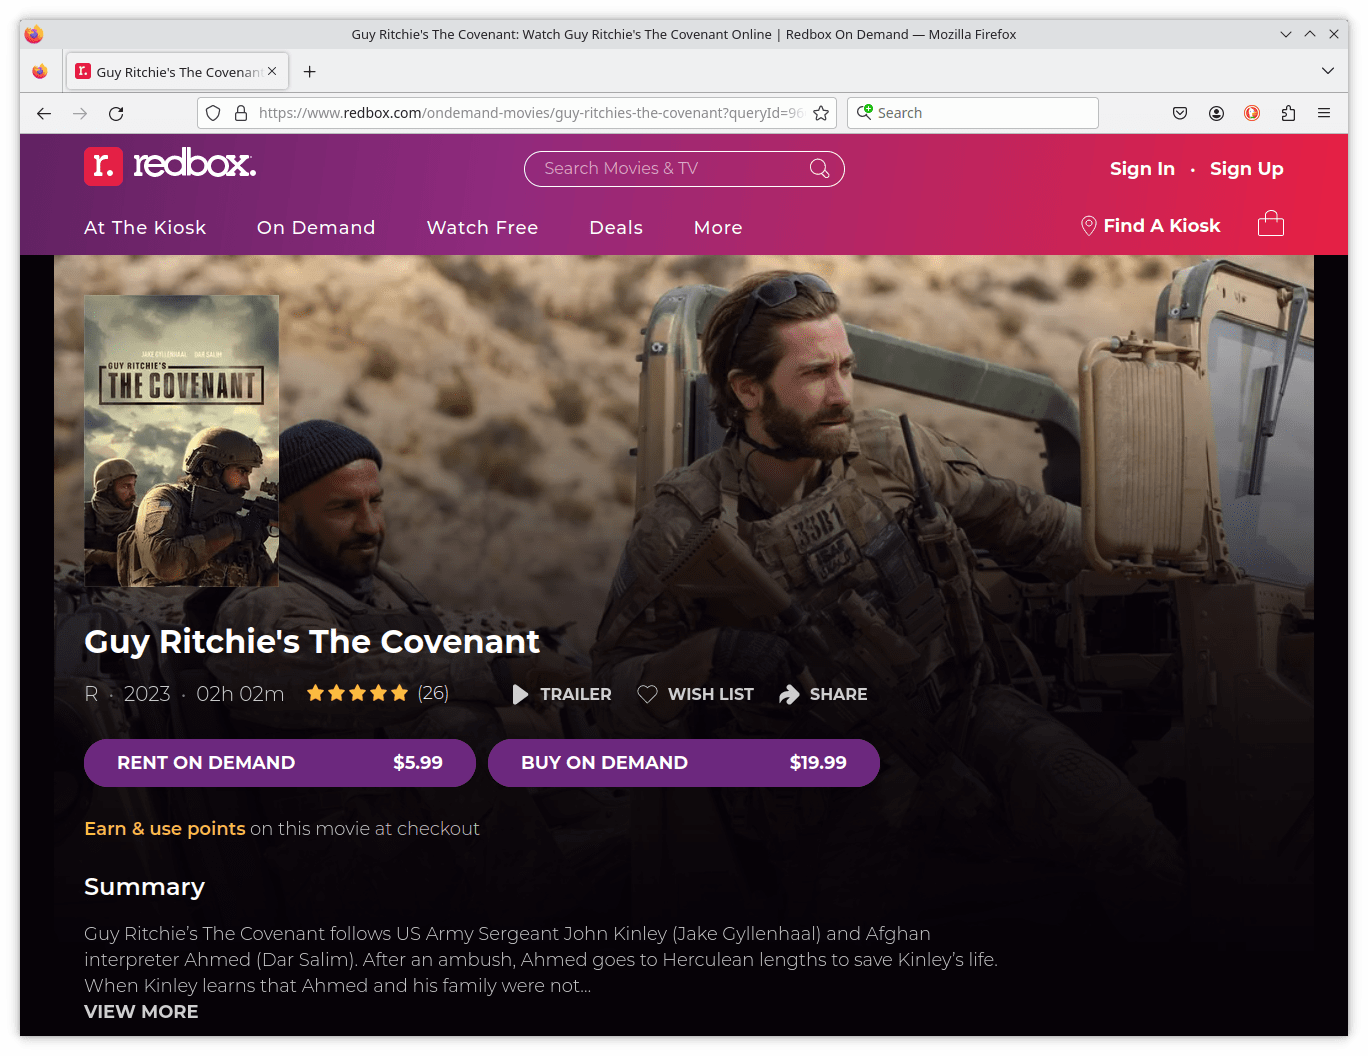 Guy Ritchie's The Covenant (2023) on Redbox